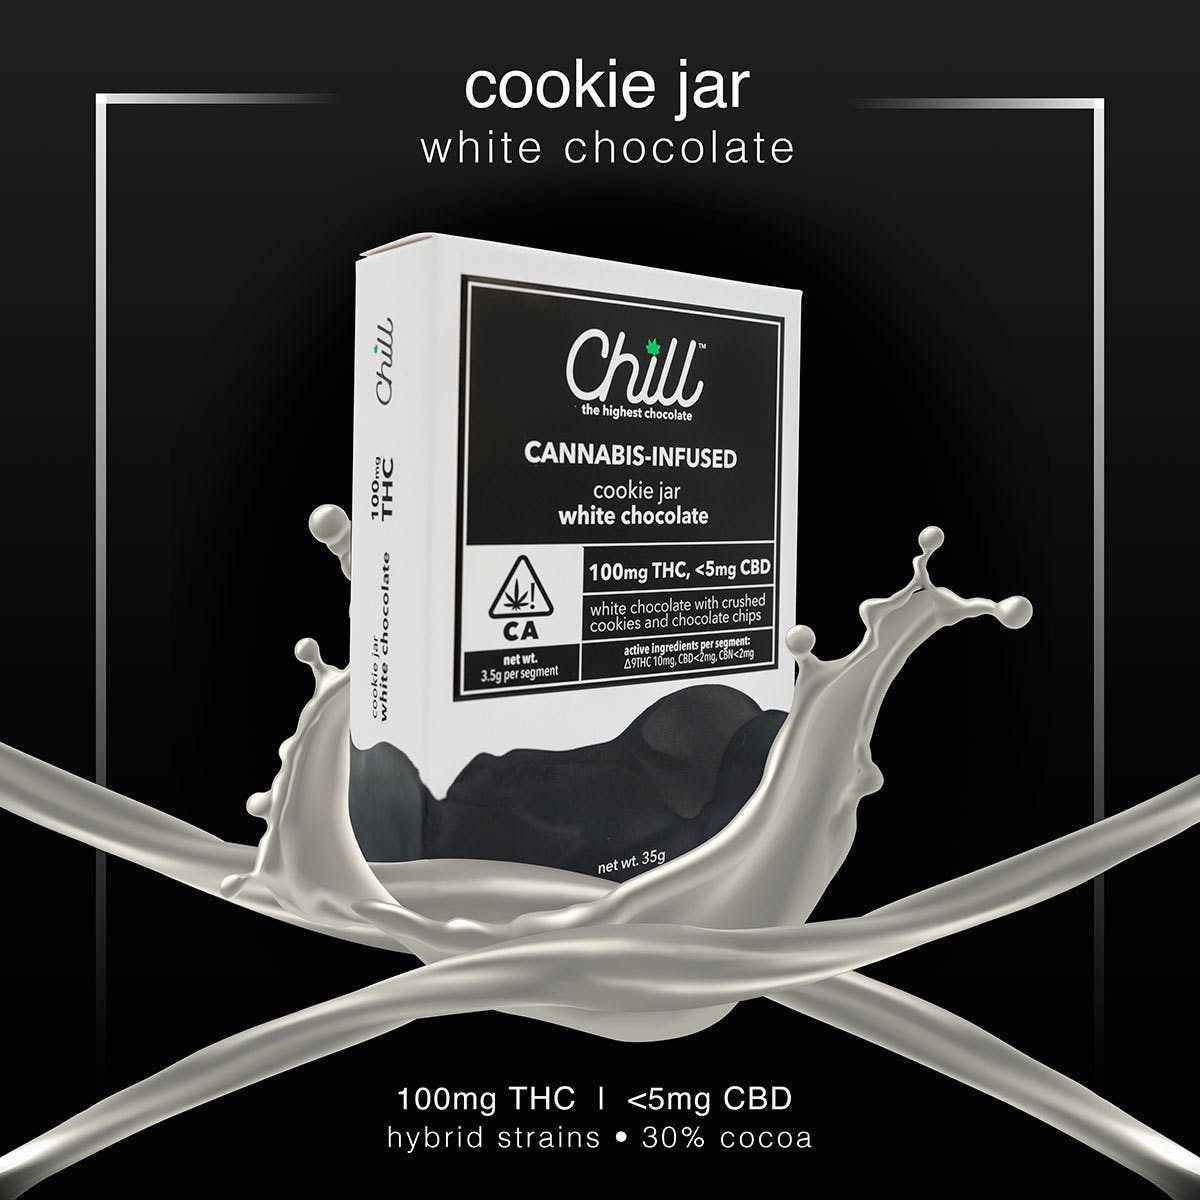 edible-chill-cannabis-infused-cookie-jar-white-chocolate